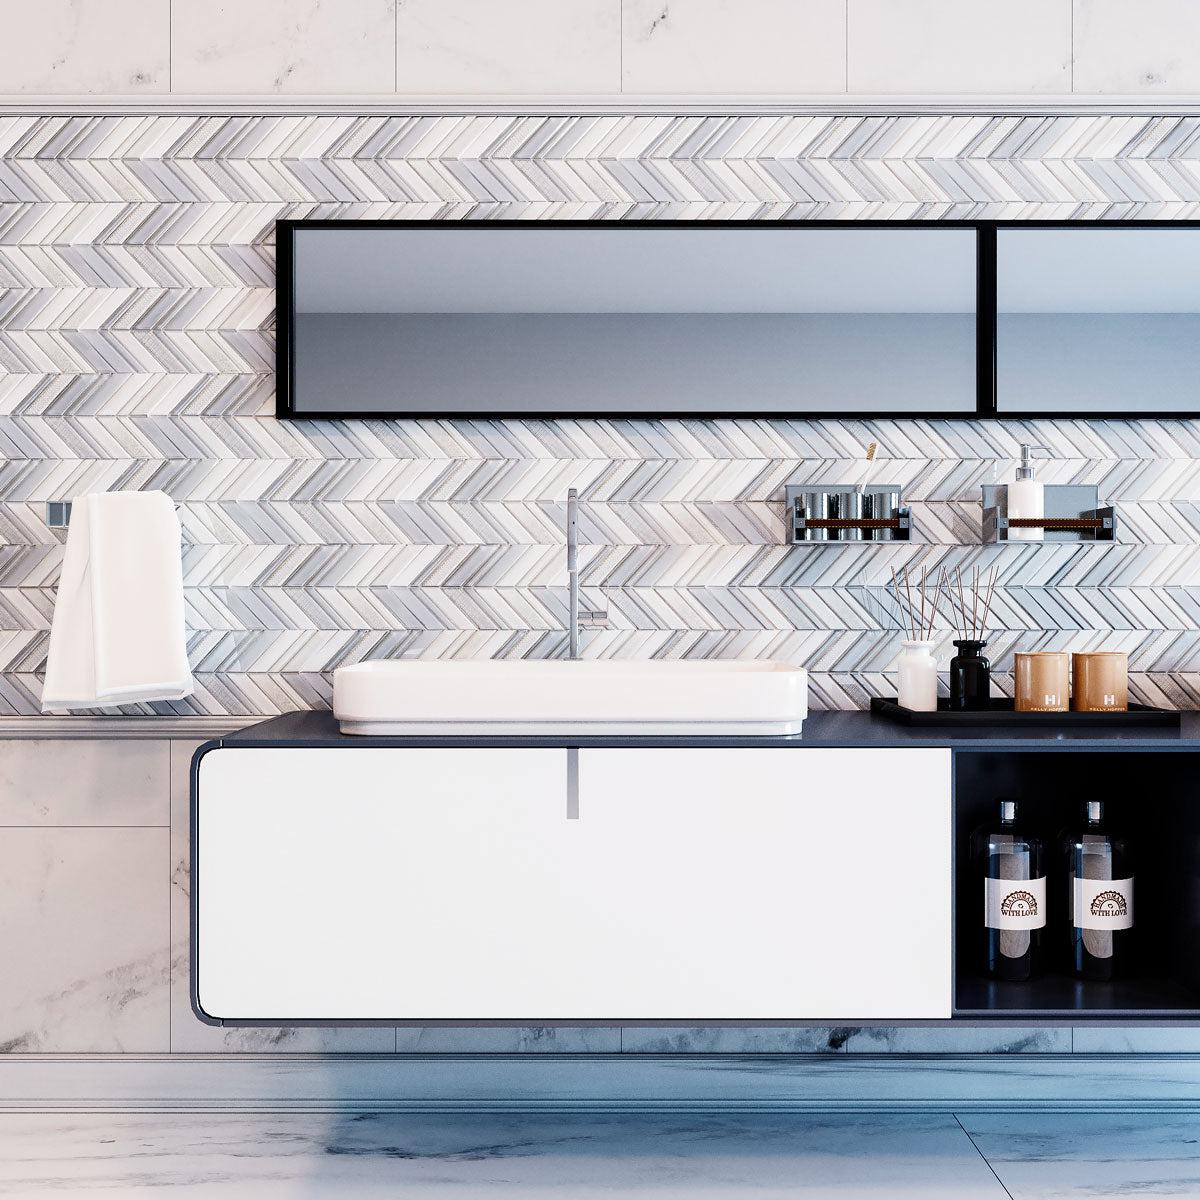 Chevron glass tile in shades of blue and gray for a patterned bathroom wall